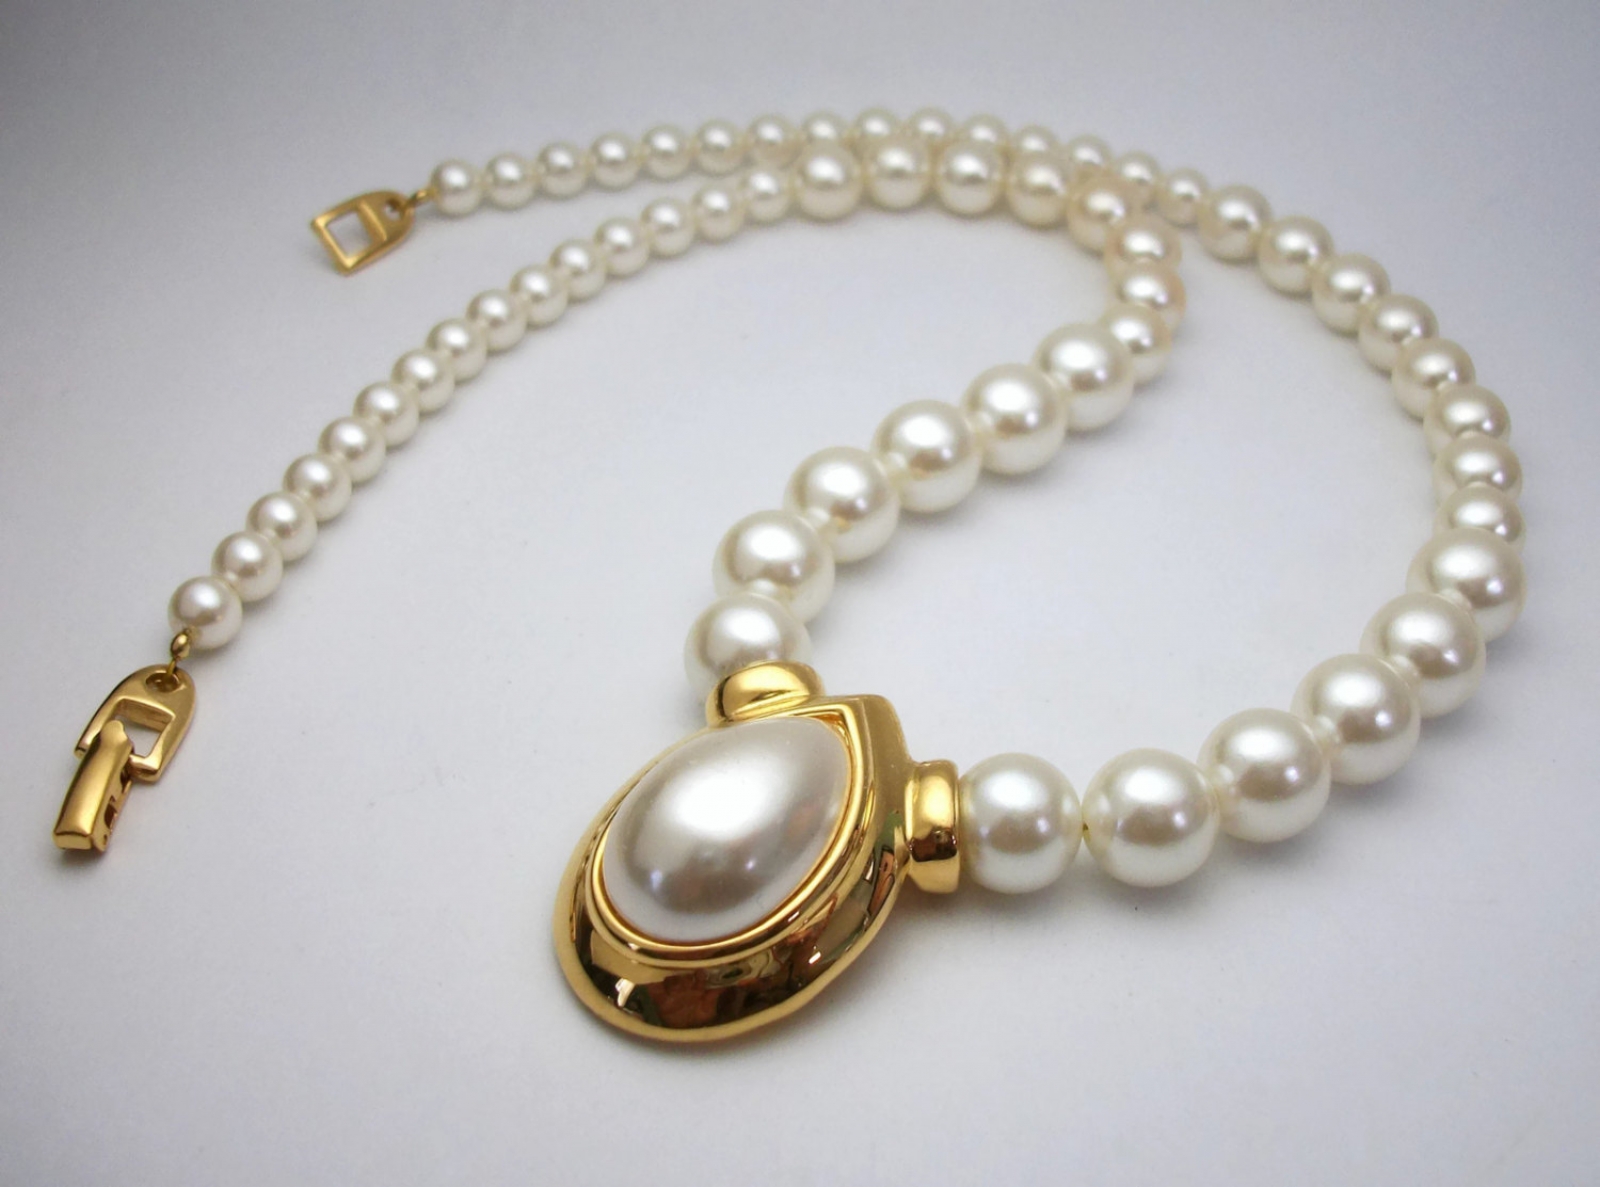 Vintage Napier Jewelry, Napier Necklace, Faux Pearl Necklace Graduated  Pearls & Teardrop Pearl Pendant 24 Inches Hinge Clip Clasp - Etsy New  Zealand